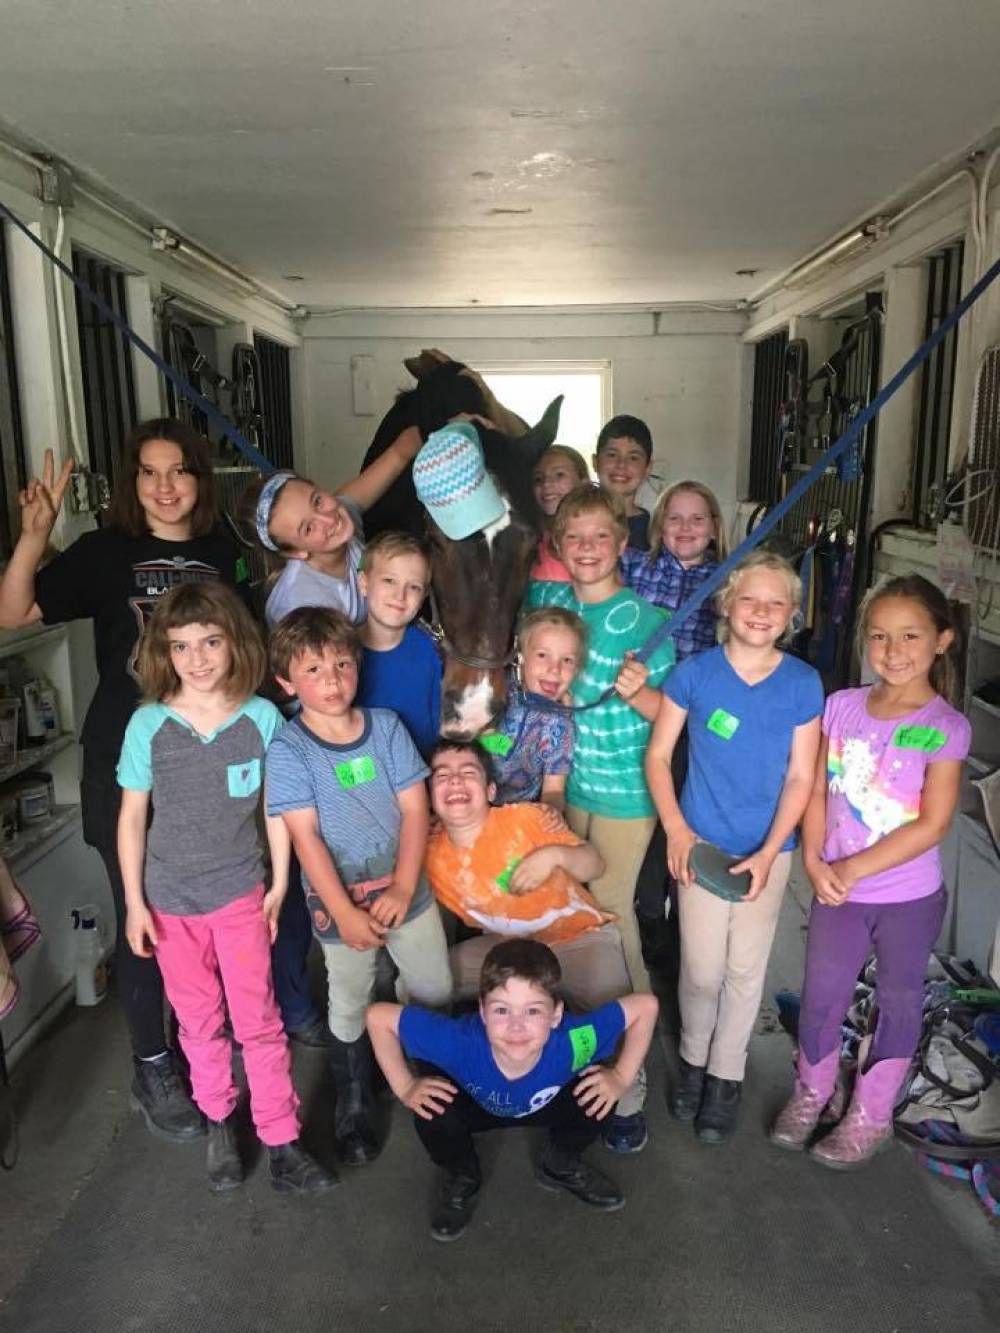 TOP RHODE ISLAND EQUESTRIAN CAMP: Faith Hill Farm is a Top Equestrian Summer Camp located in East Greenwich Rhode Island offering many fun and enriching Equestrian and other camp programs. 